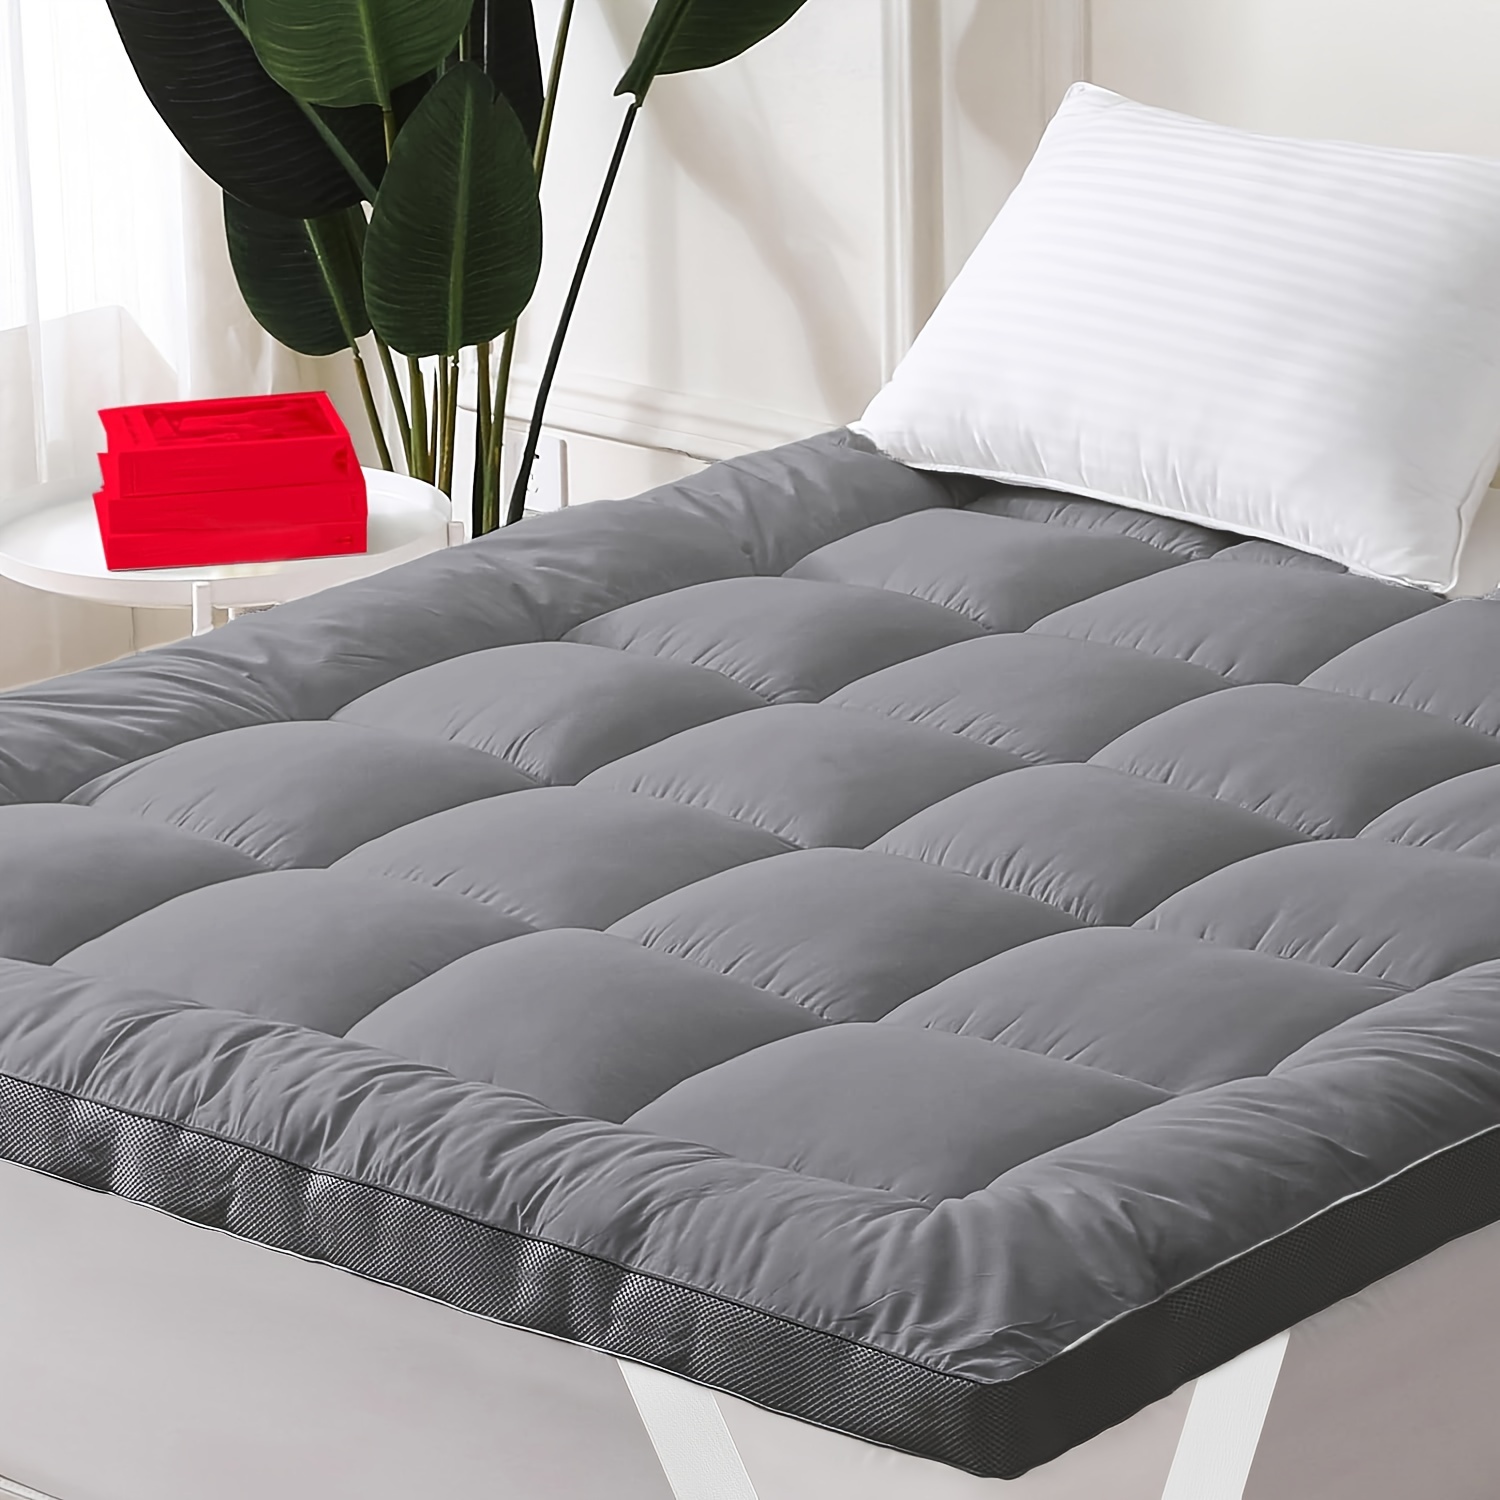  Air Mattress Cover Full Mattress Pad, Thick Quilted